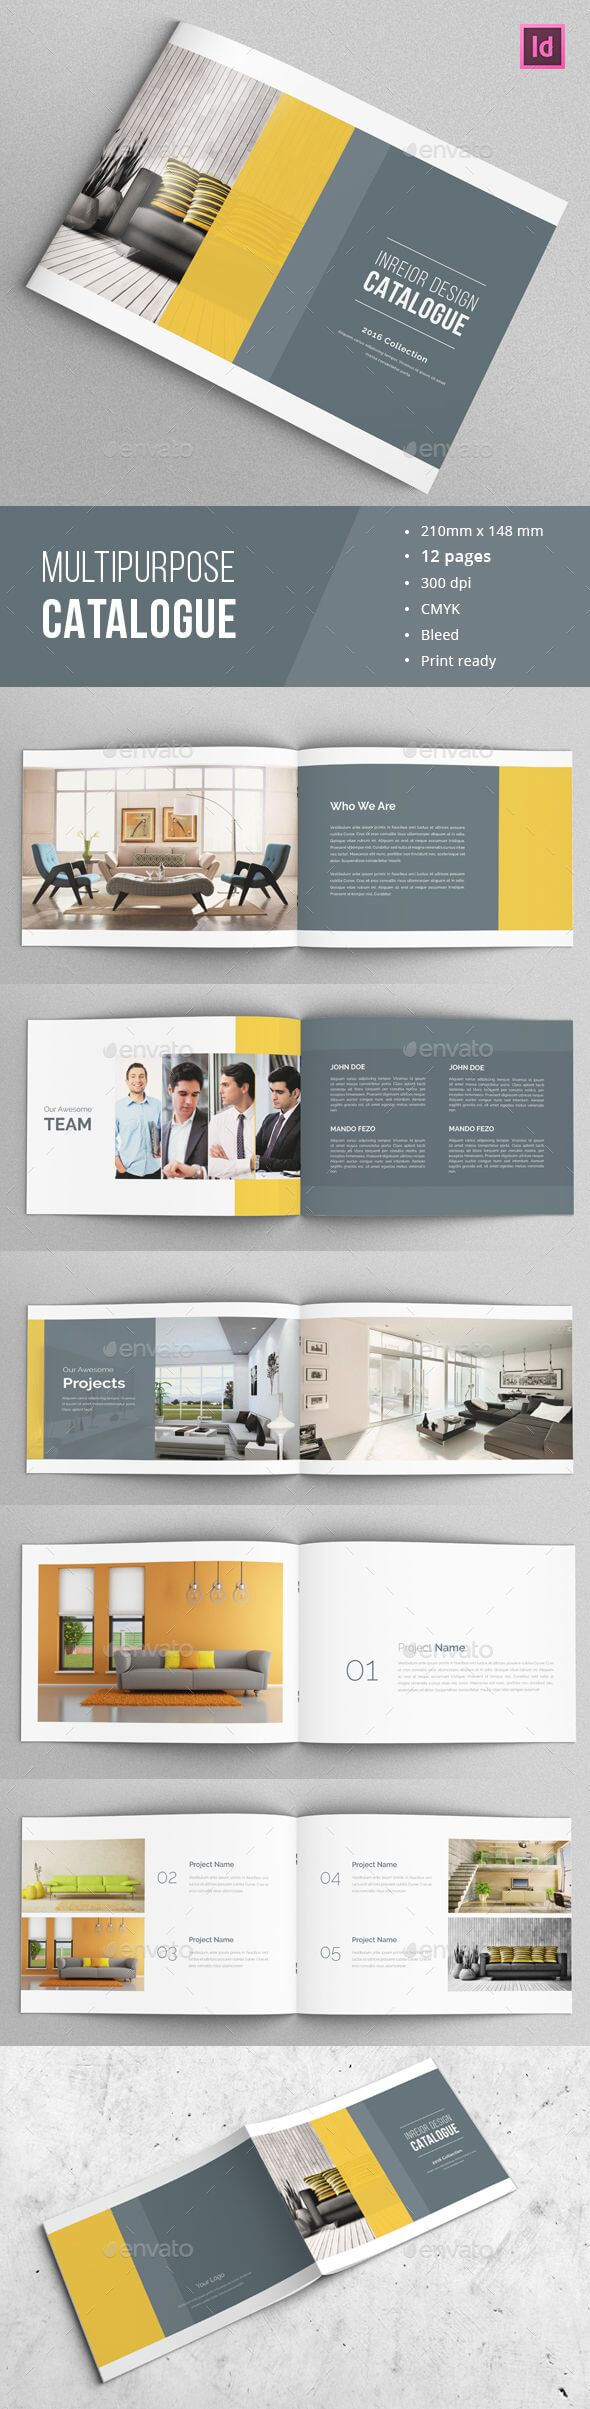 Multipurpose Brochure / Catalogue Template This Is 12 Page Intended For 12 Page Brochure Template